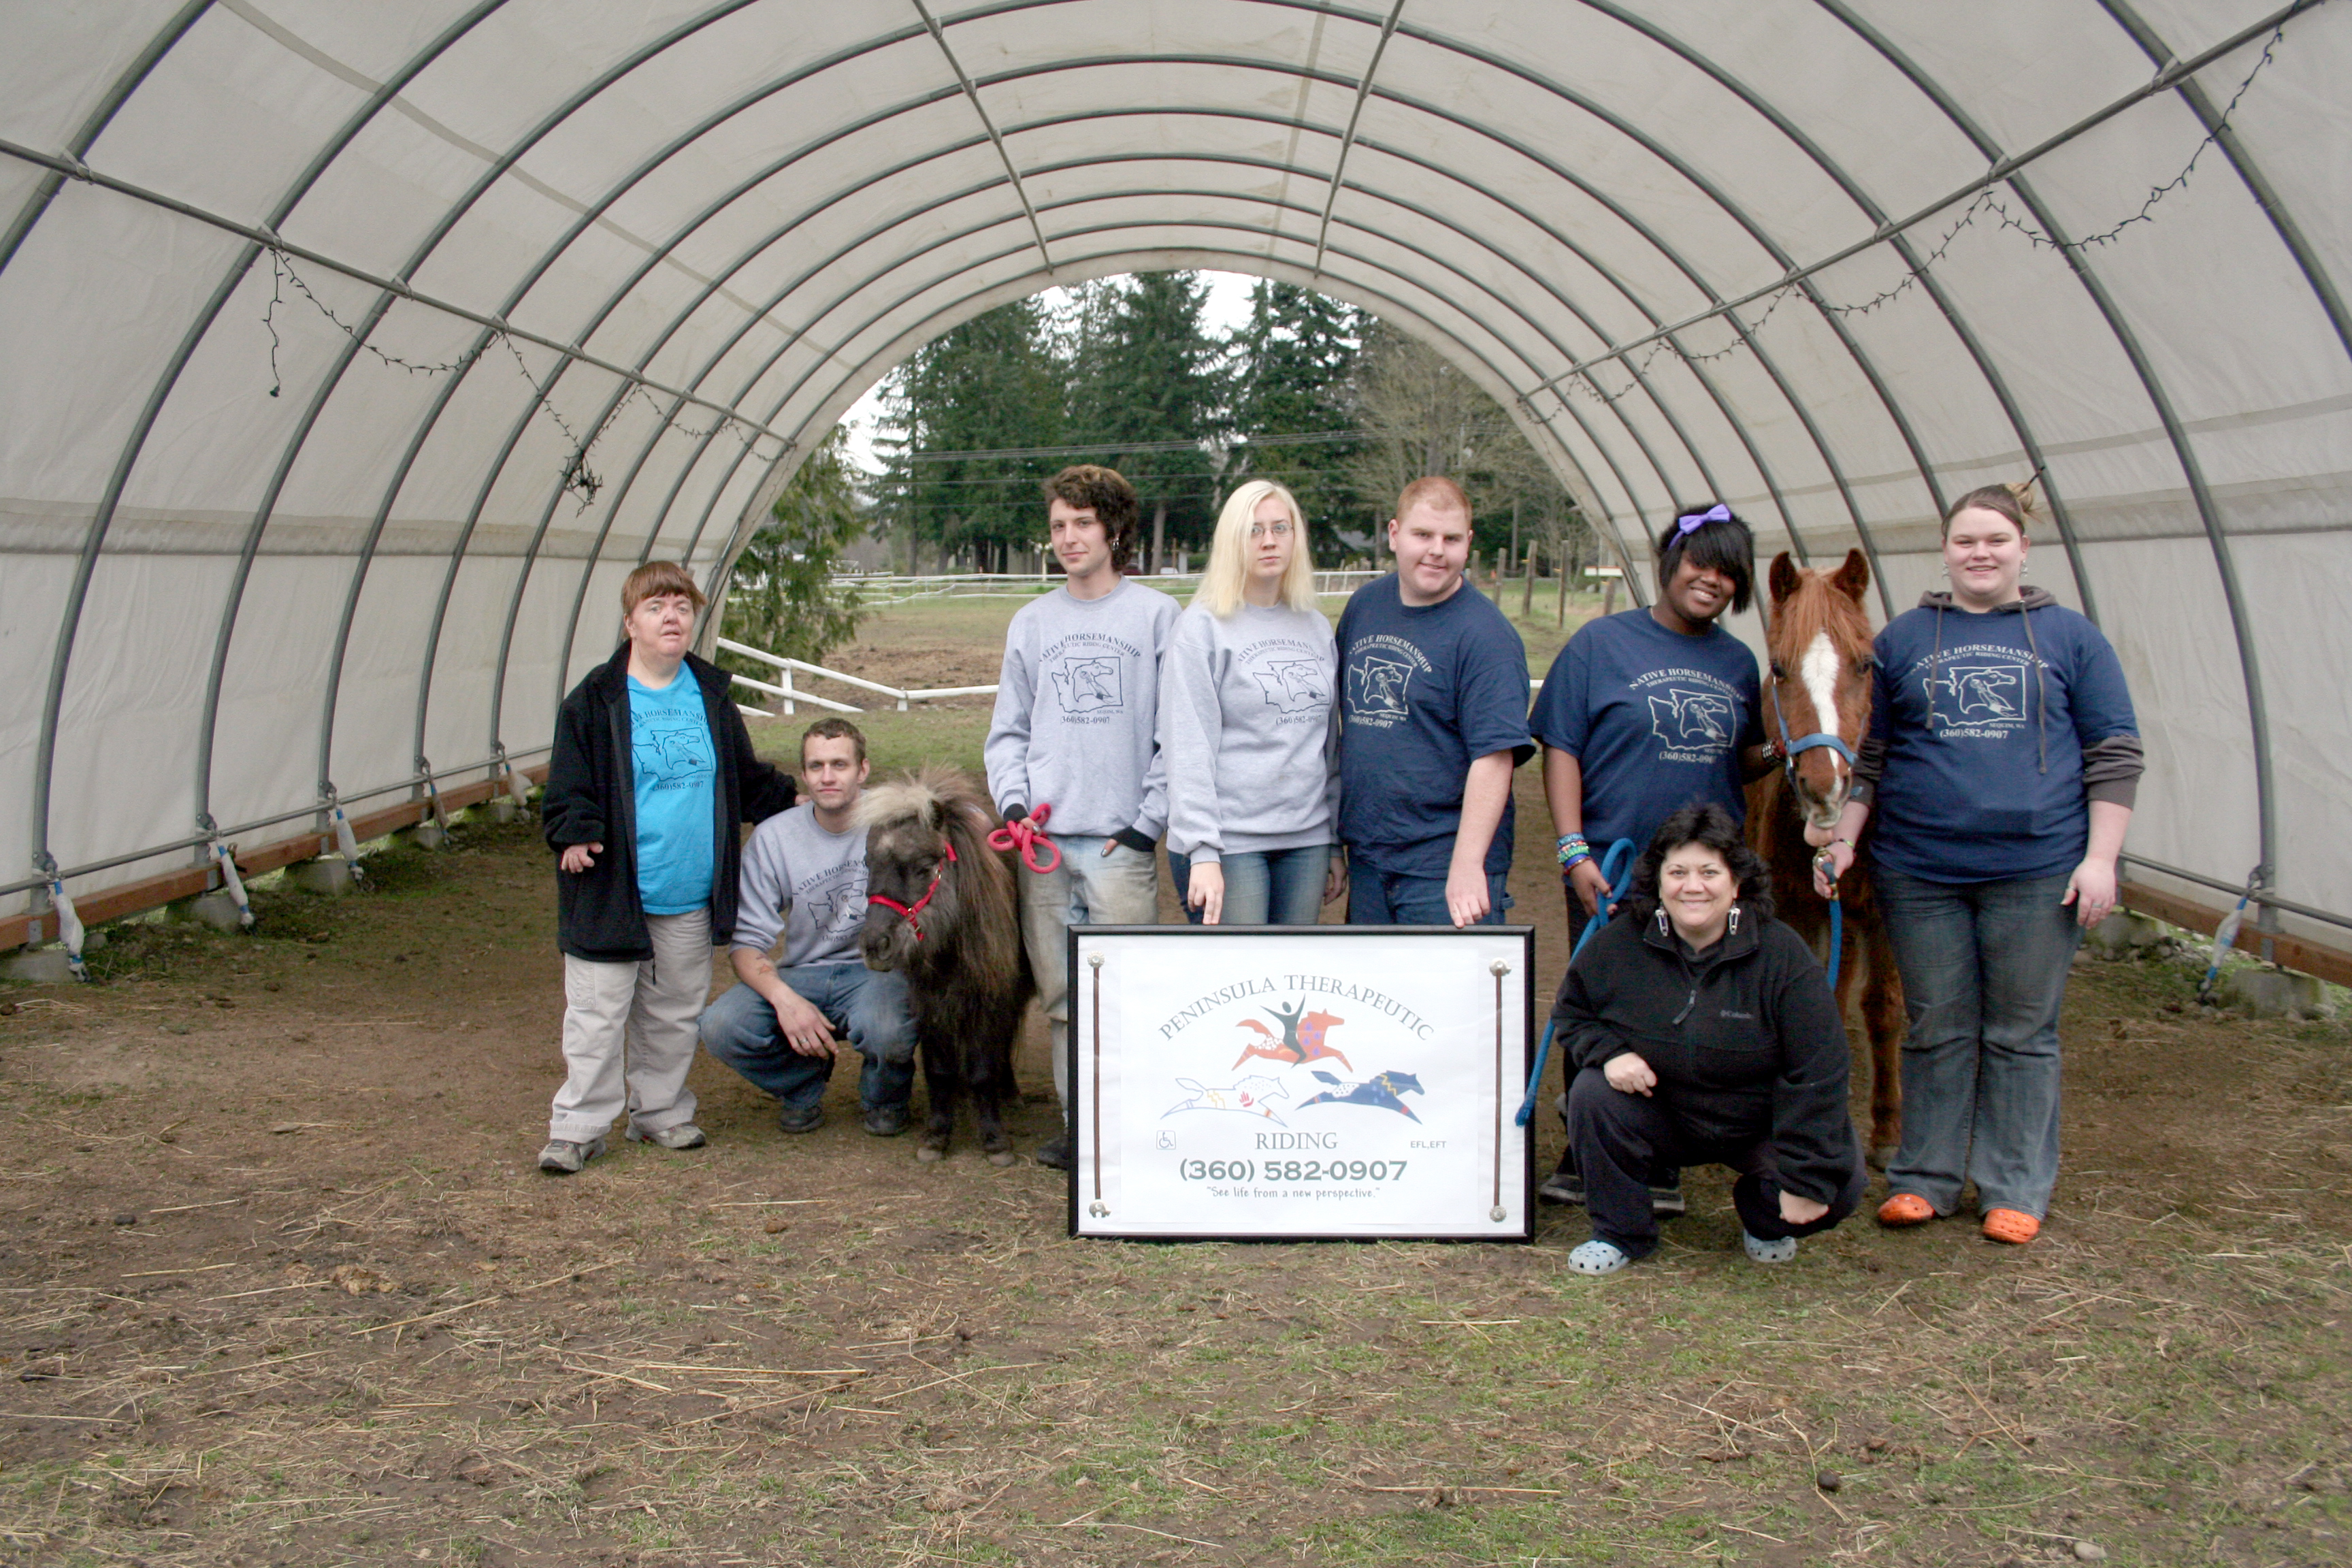 The North American Riding for the Handicapped Association has changed its name to Peninsula Therapeutic Riding to more aptly describe the type of services it provides to the community. Pictured are